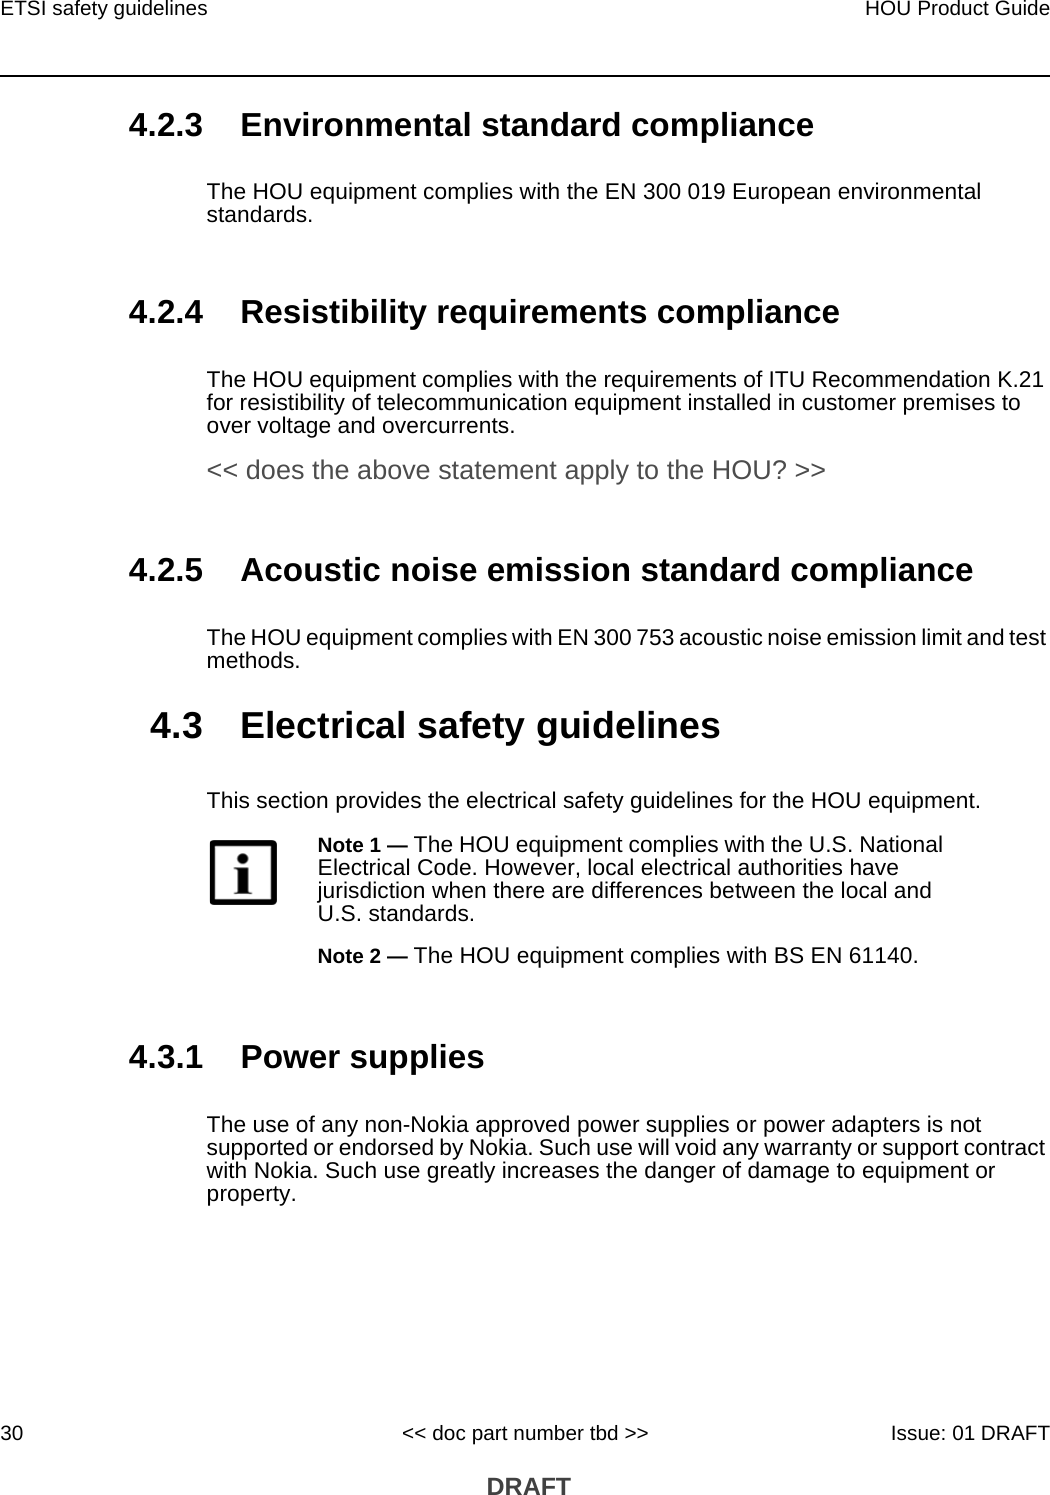 ETSI safety guidelines30HOU Product Guide&lt;&lt; doc part number tbd &gt;&gt; Issue: 01 DRAFT DRAFT4.2.3 Environmental standard complianceThe HOU equipment complies with the EN 300 019 European environmental standards.4.2.4 Resistibility requirements complianceThe HOU equipment complies with the requirements of ITU Recommendation K.21 for resistibility of telecommunication equipment installed in customer premises to over voltage and overcurrents. &lt;&lt; does the above statement apply to the HOU? &gt;&gt;4.2.5 Acoustic noise emission standard complianceThe HOU equipment complies with EN 300 753 acoustic noise emission limit and test methods. 4.3 Electrical safety guidelinesThis section provides the electrical safety guidelines for the HOU equipment.4.3.1 Power suppliesThe use of any non-Nokia approved power supplies or power adapters is not supported or endorsed by Nokia. Such use will void any warranty or support contract with Nokia. Such use greatly increases the danger of damage to equipment or property.Note 1 — The HOU equipment complies with the U.S. National Electrical Code. However, local electrical authorities have jurisdiction when there are differences between the local and U.S. standards.Note 2 — The HOU equipment complies with BS EN 61140.